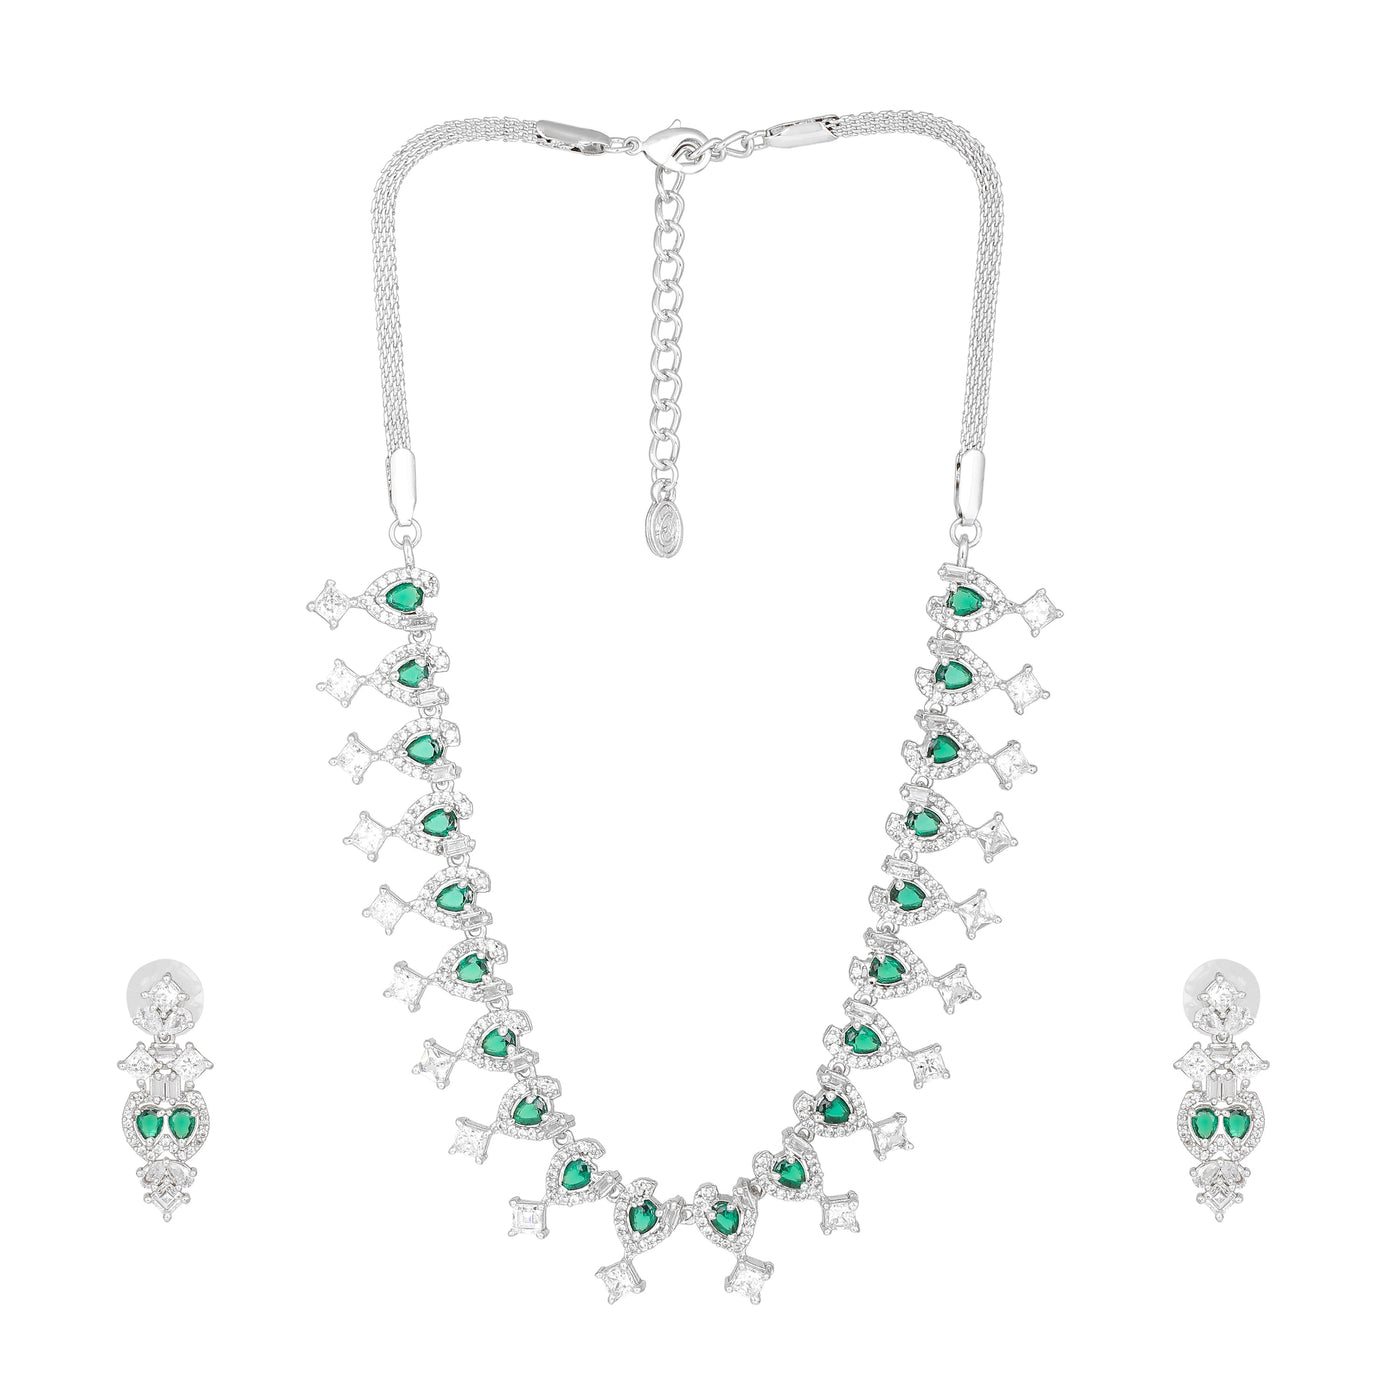 Estele Rhodium Plated CZ Sparkling Necklace Set with Green Crystals for Women